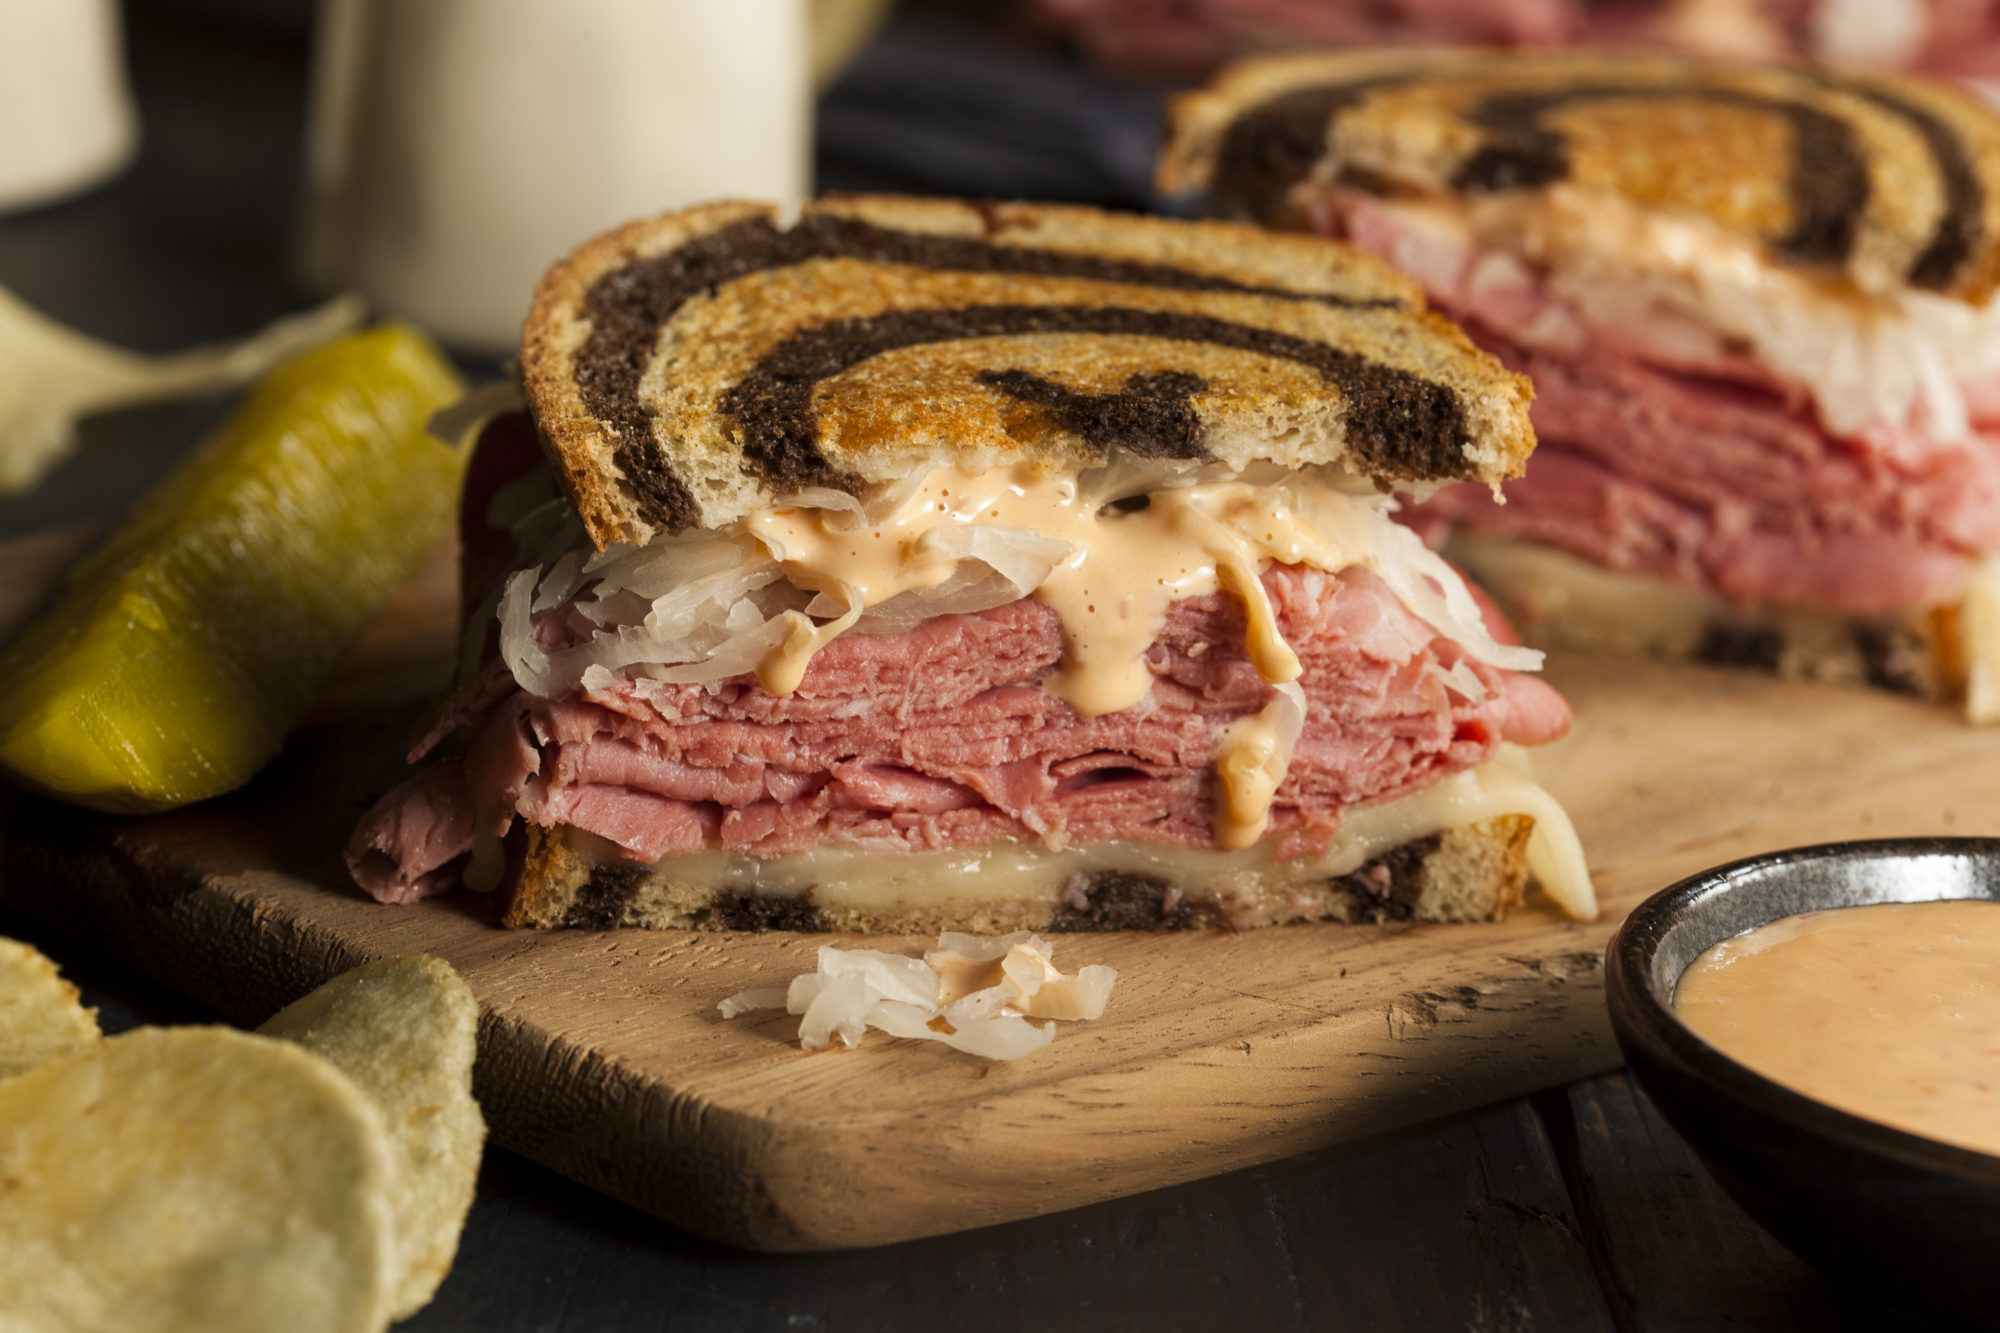 A reuben sandwich with a sauce on the side.